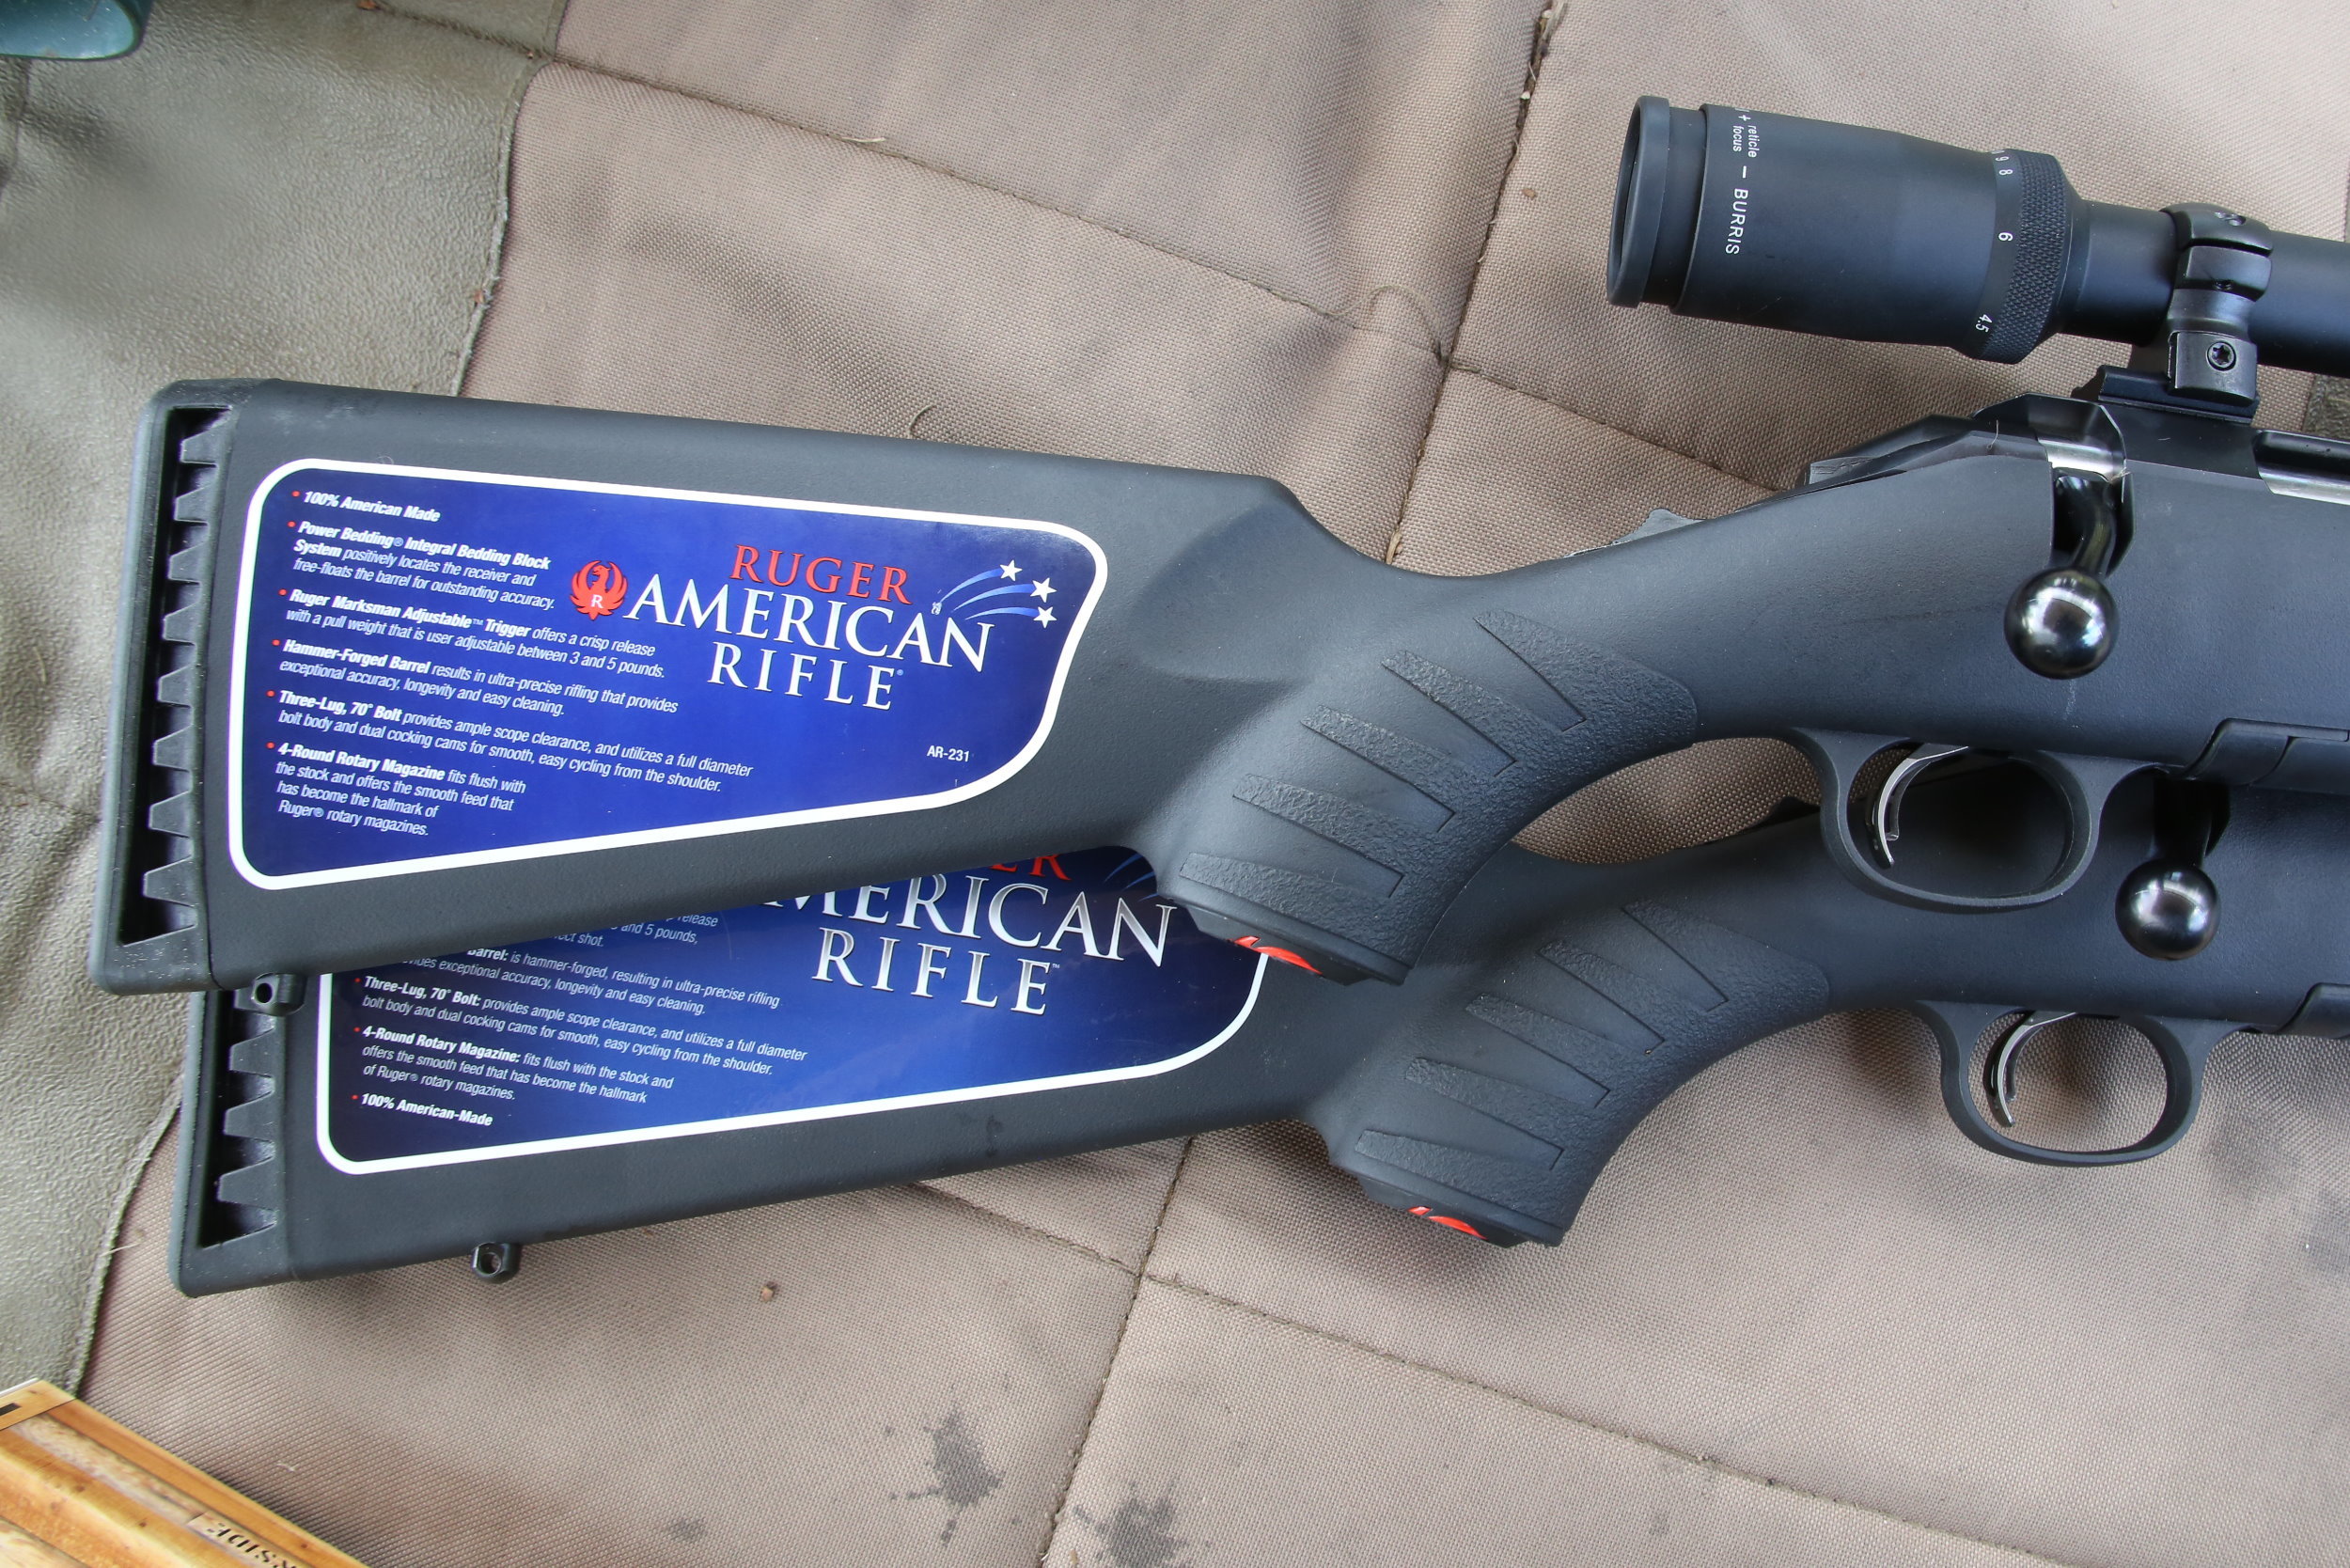 Rifle ruger reviews ranch american Ruger American